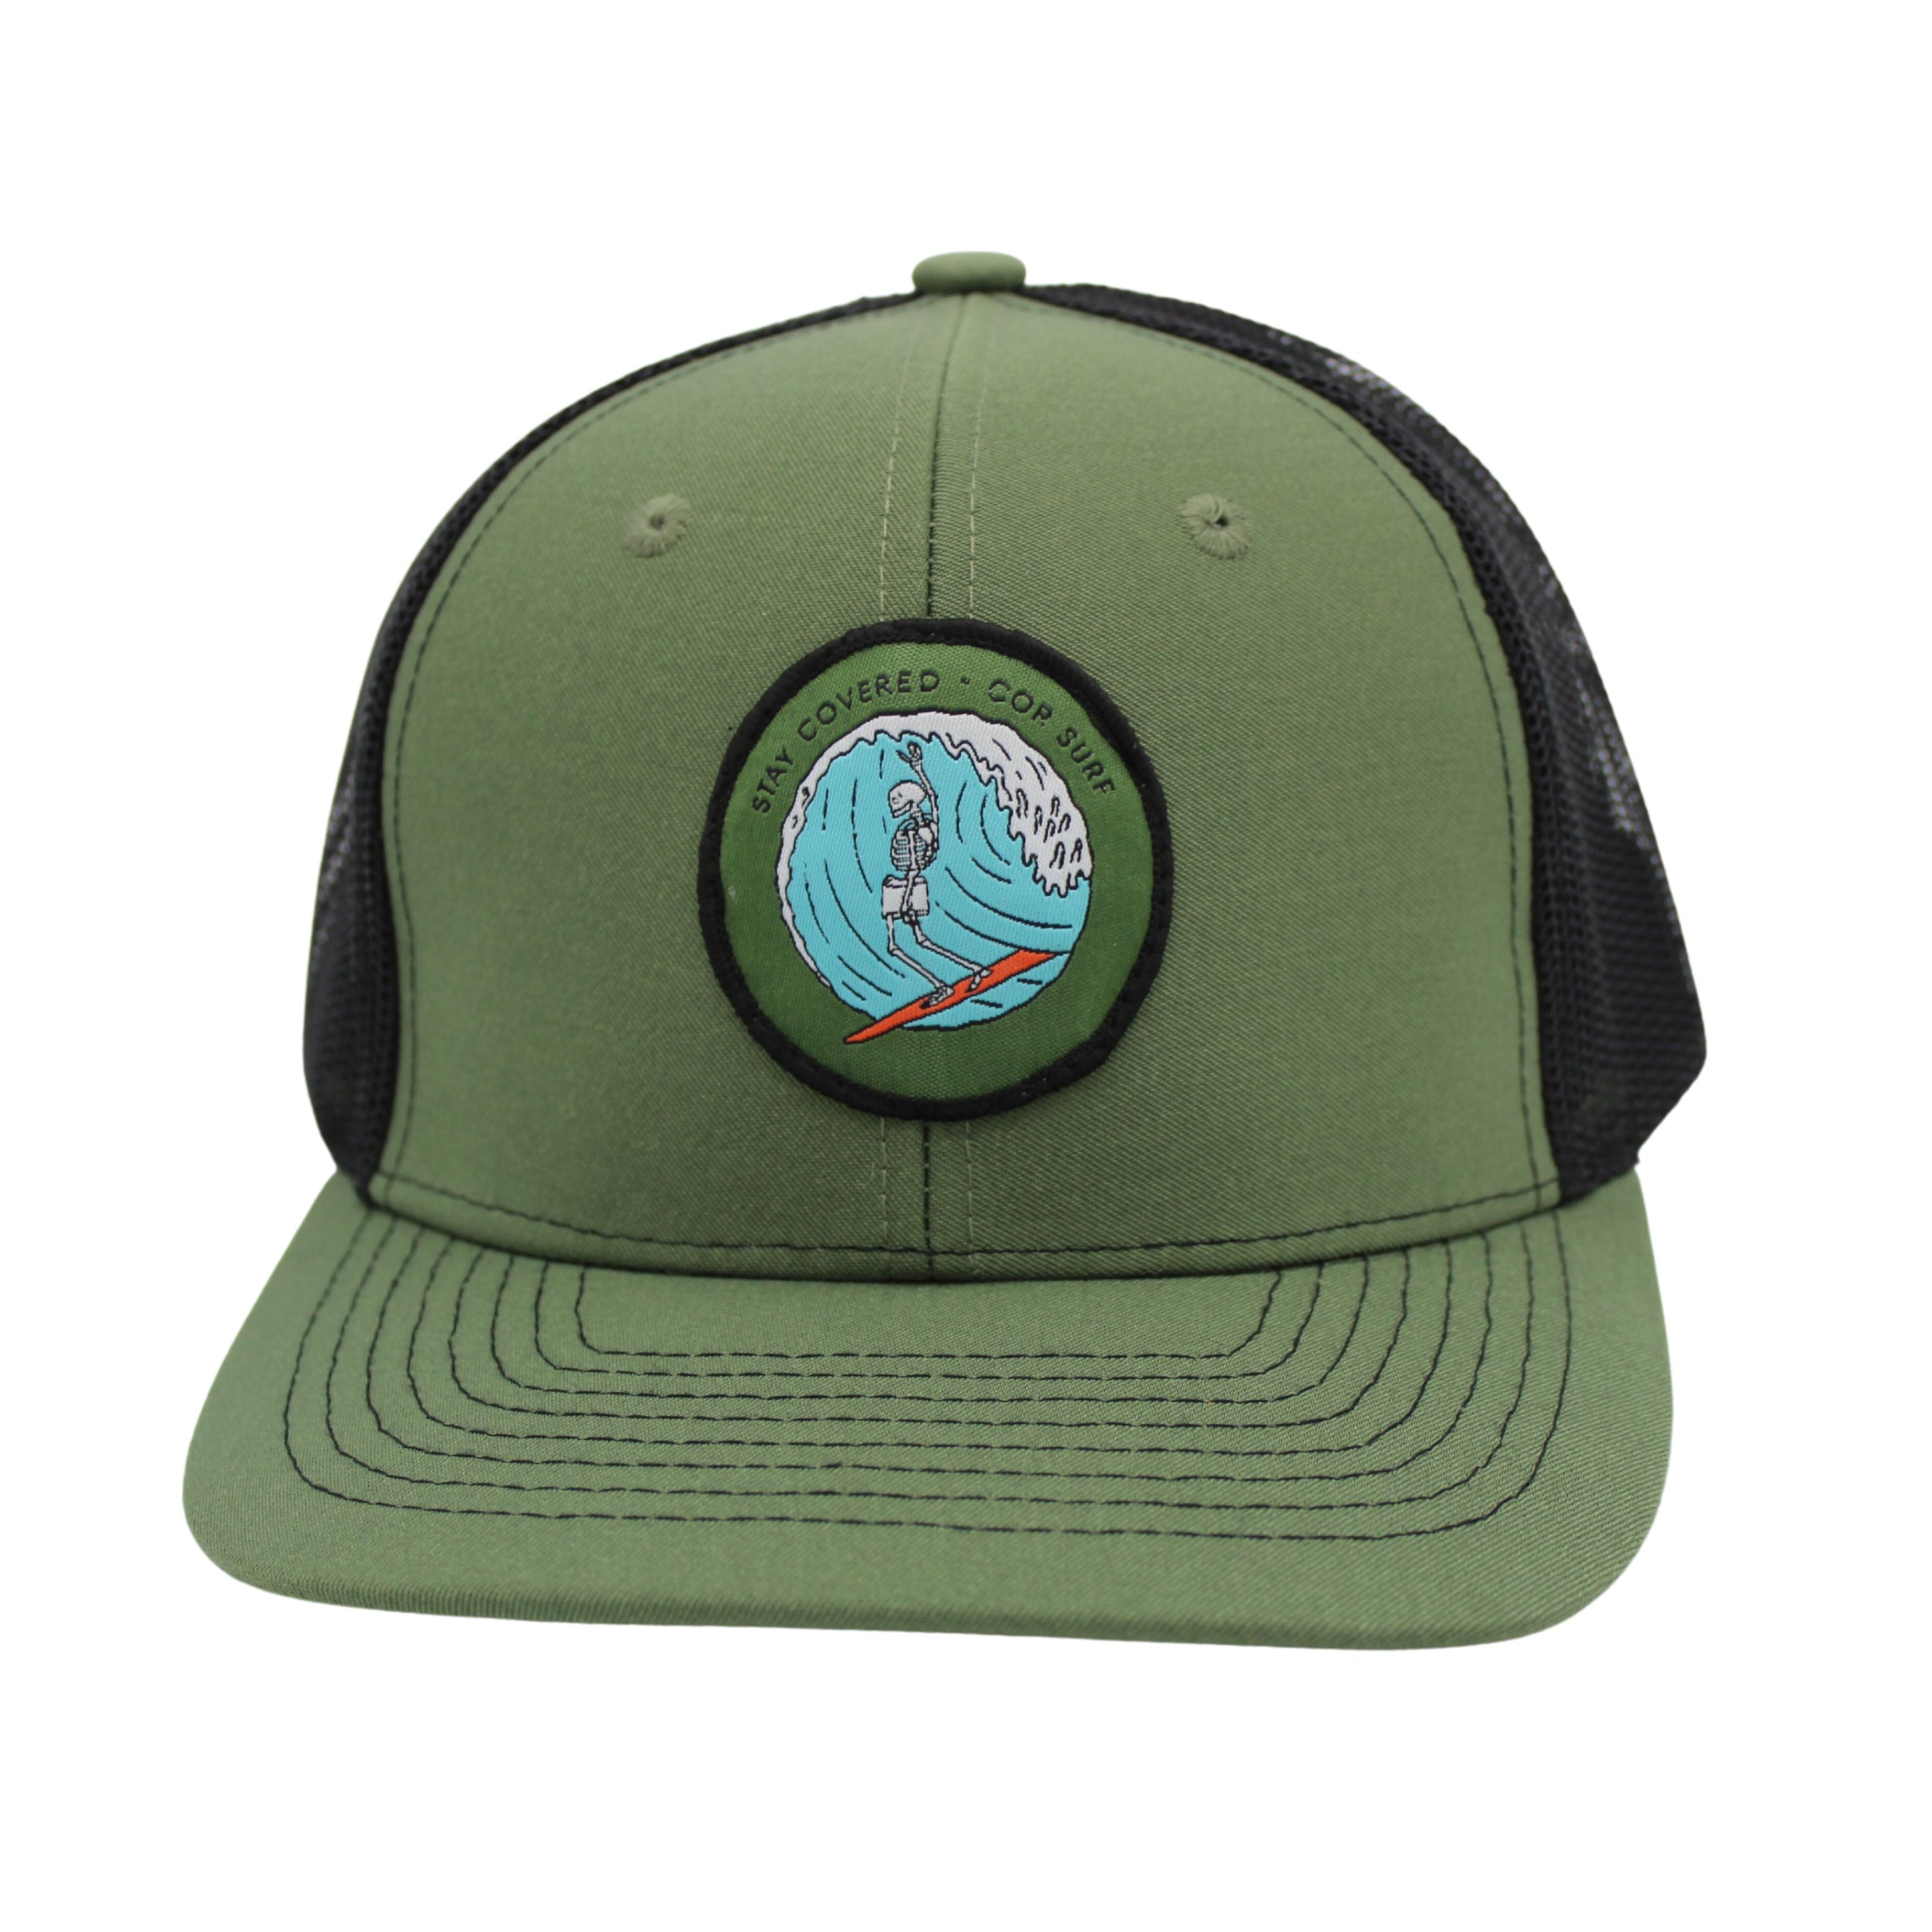 COR SURF STAY COVERED MESH SNAPBACK CAP